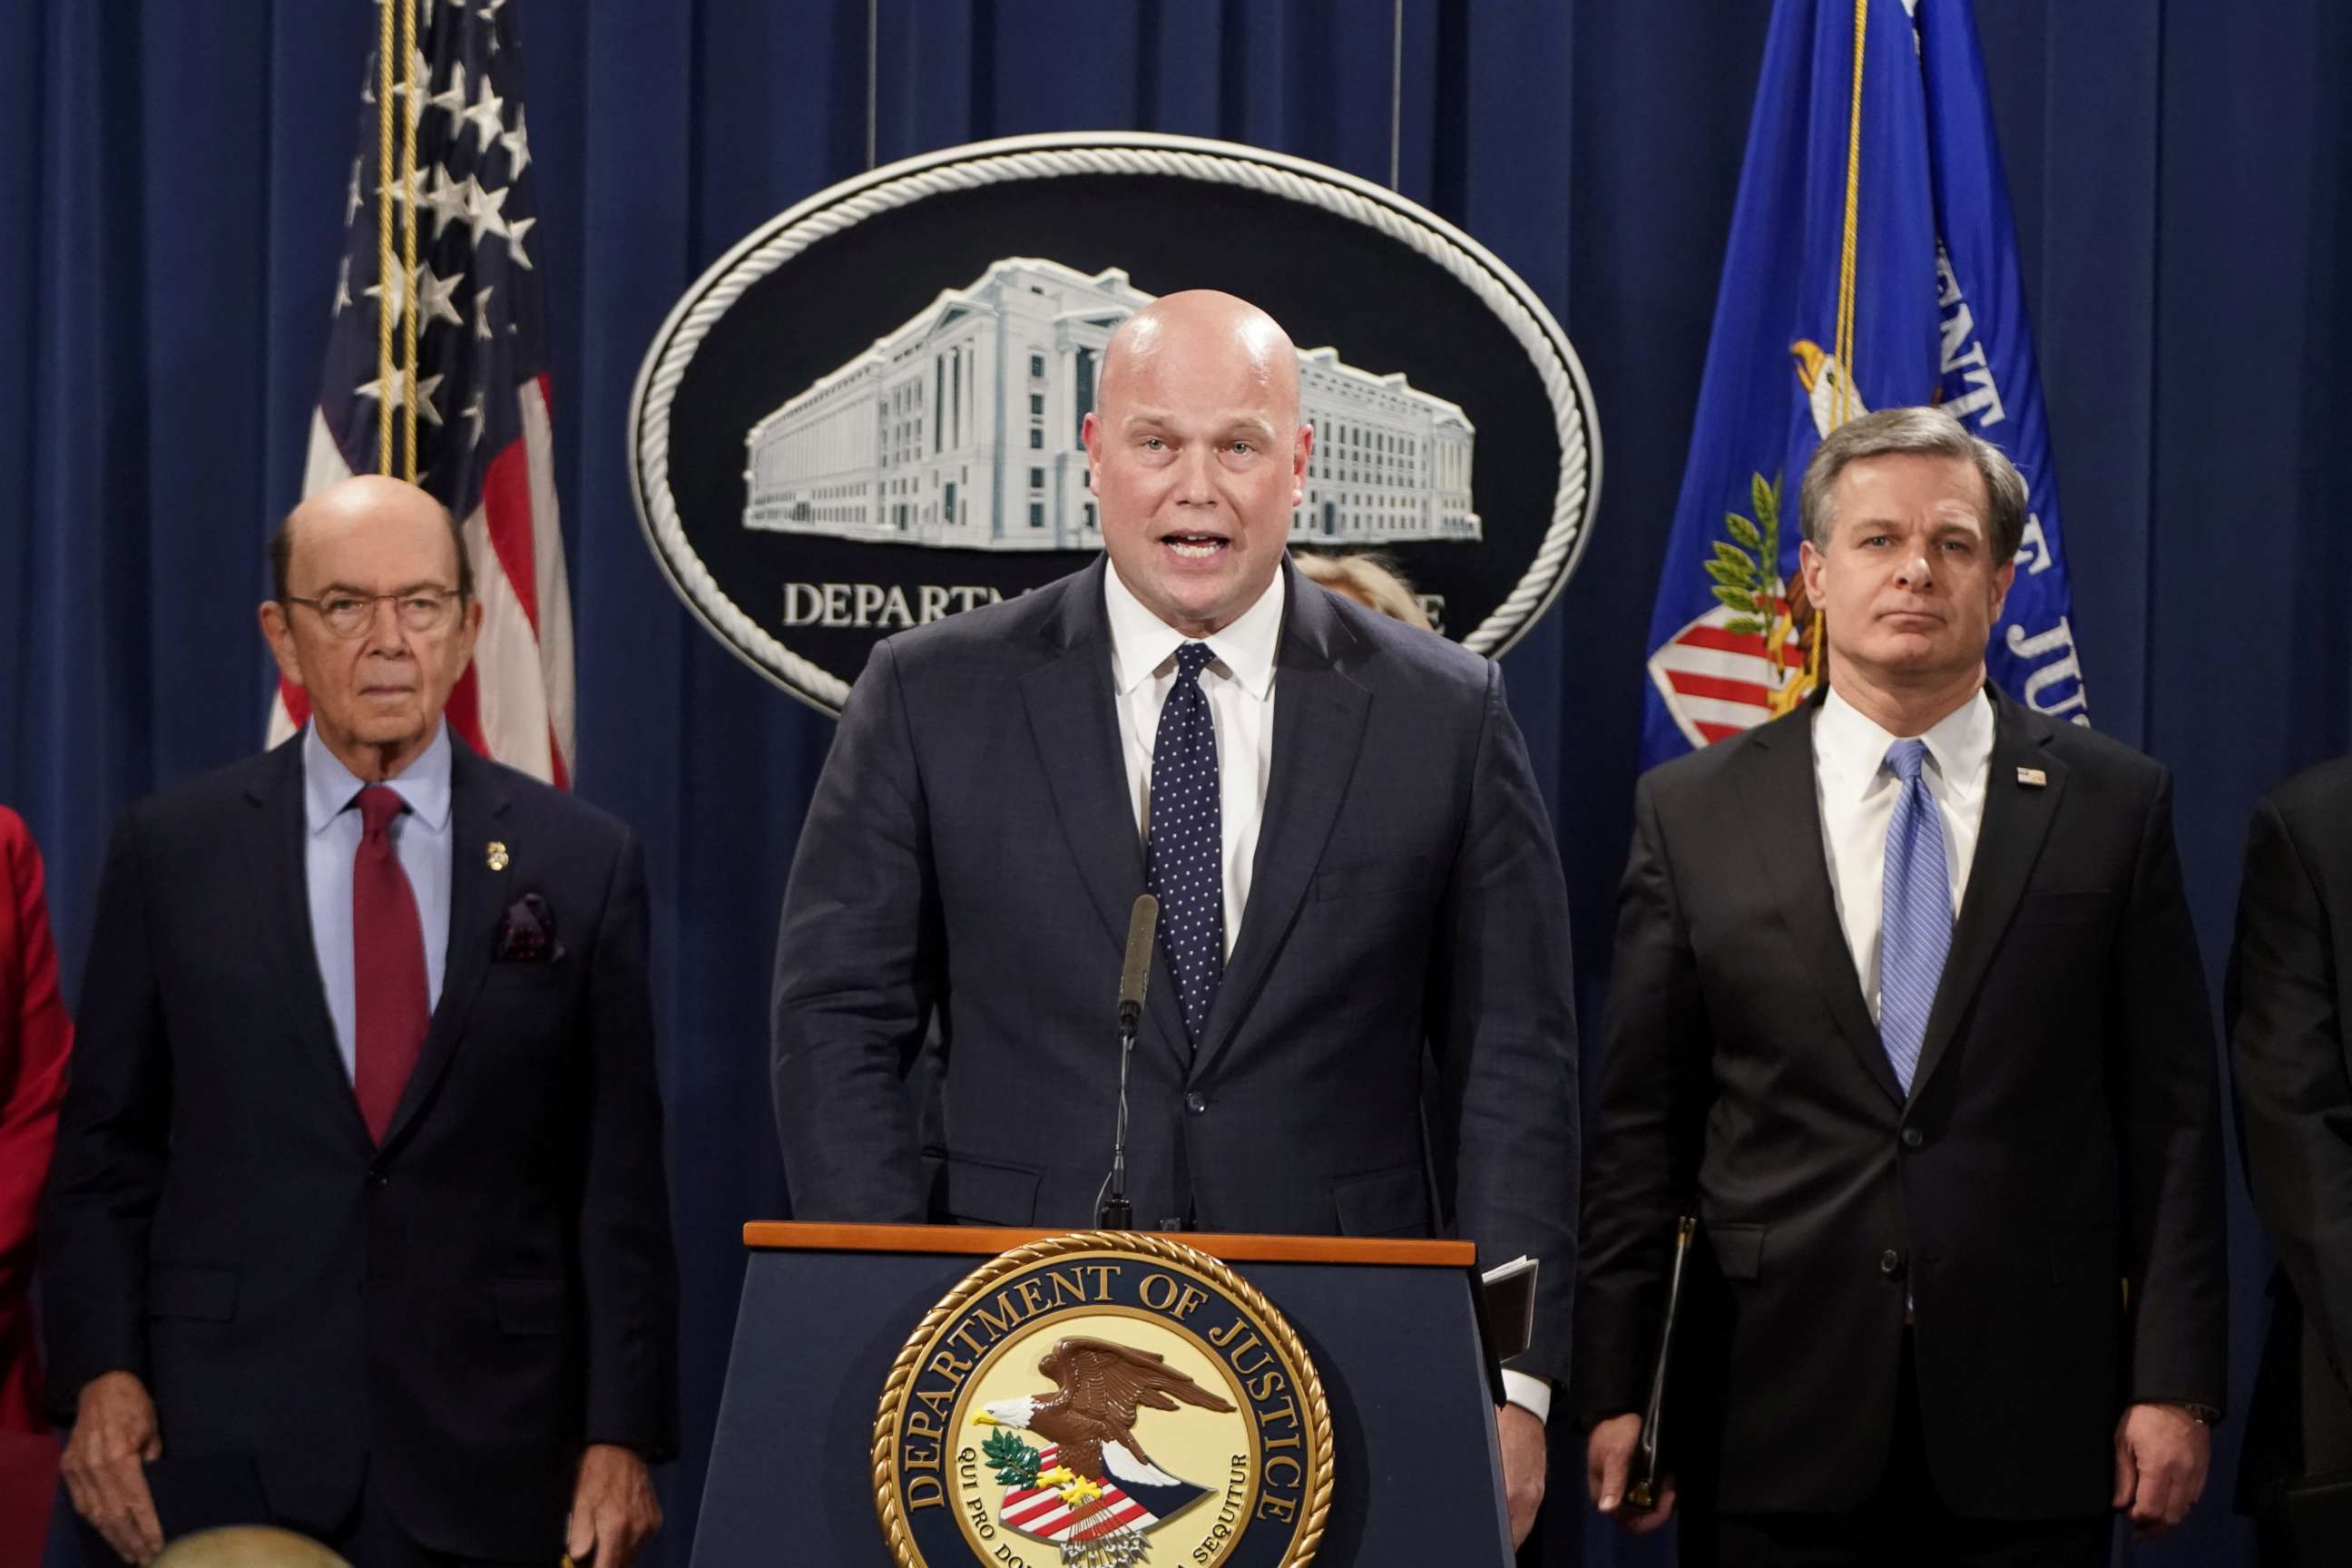 PHOTO: Acting Attorney General Matthew Whitaker holds a news conference to announce indictments against China's Huawei Technologies Co Ltd, at the Justice Department in Washington D.C., Jan. 28, 2019.